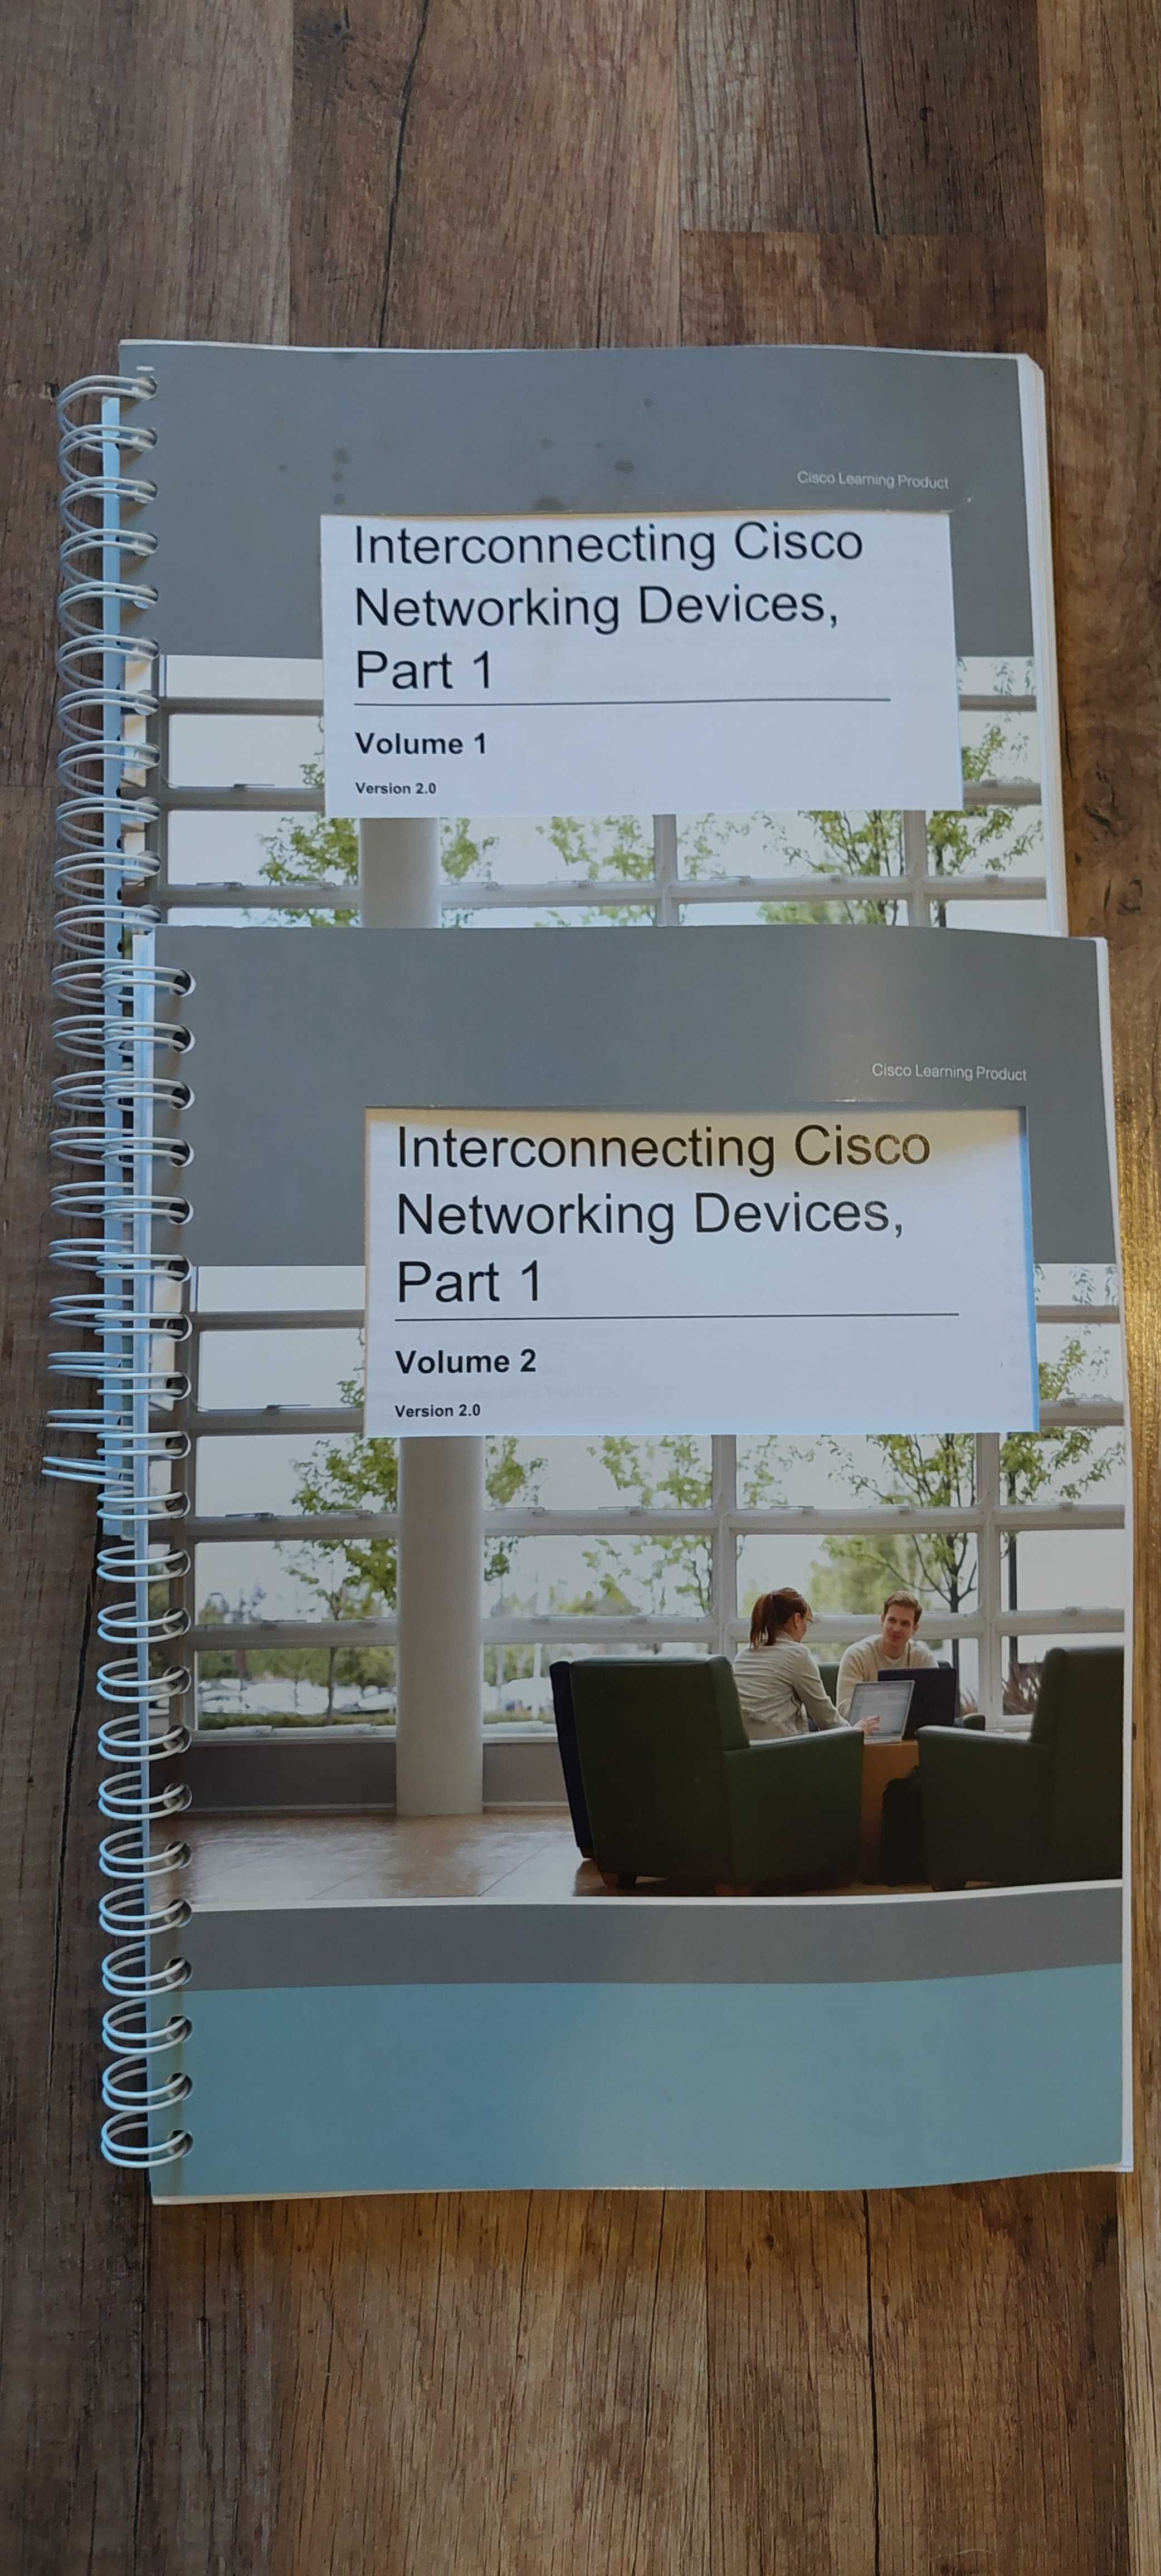 ICND1 2.0 - Interconnecting Cisco Networking Devices, Part1